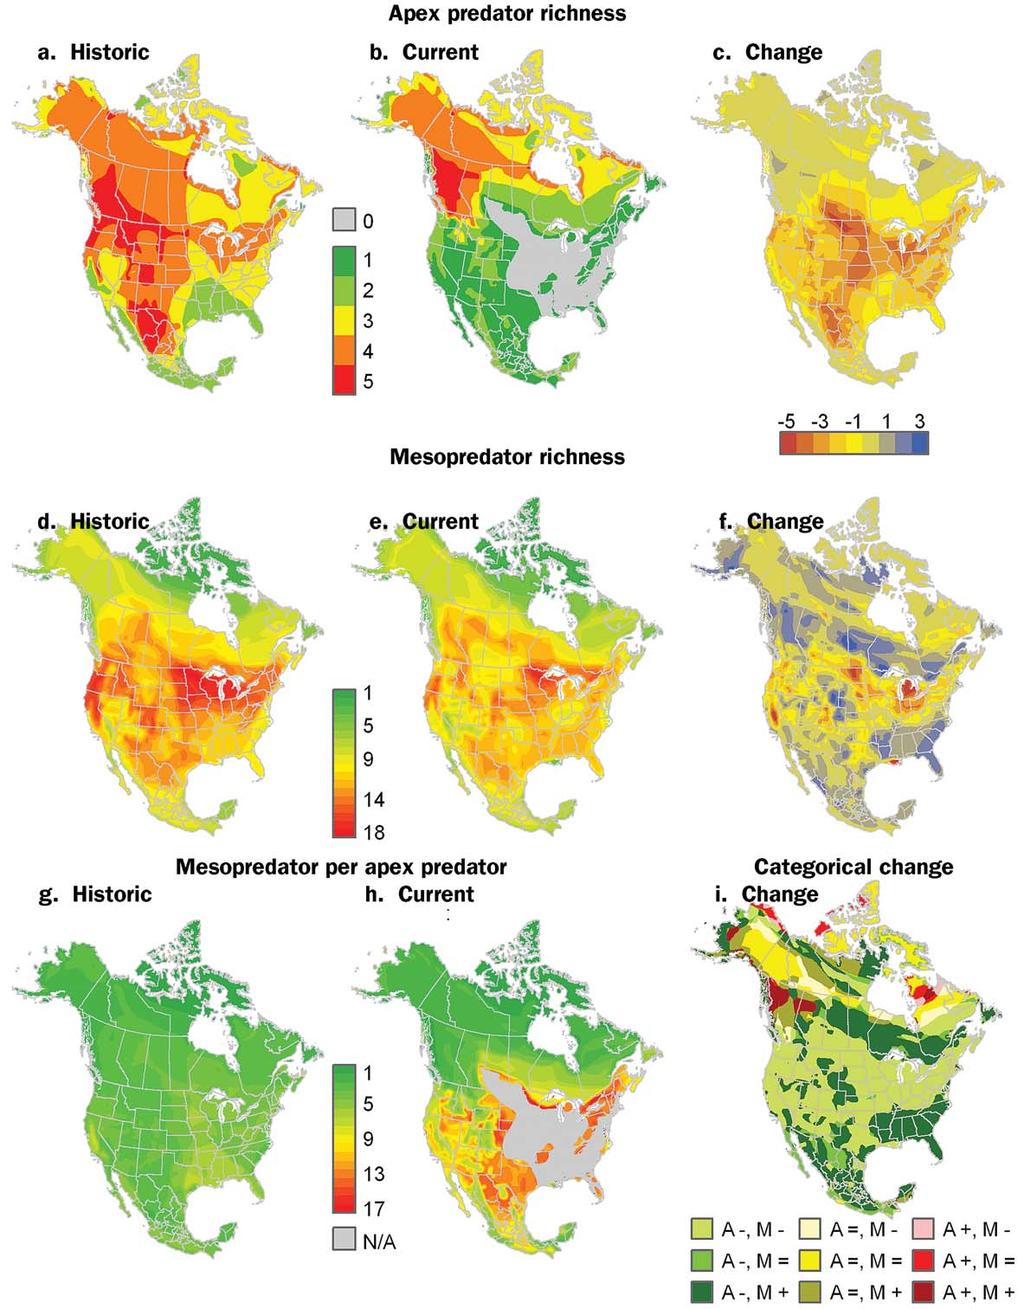 Figure 3. Distributional changes of mammalian carnivores in North America. The 7 apex predator species and 26 mesopredator species used to create the maps are listed in table 1.